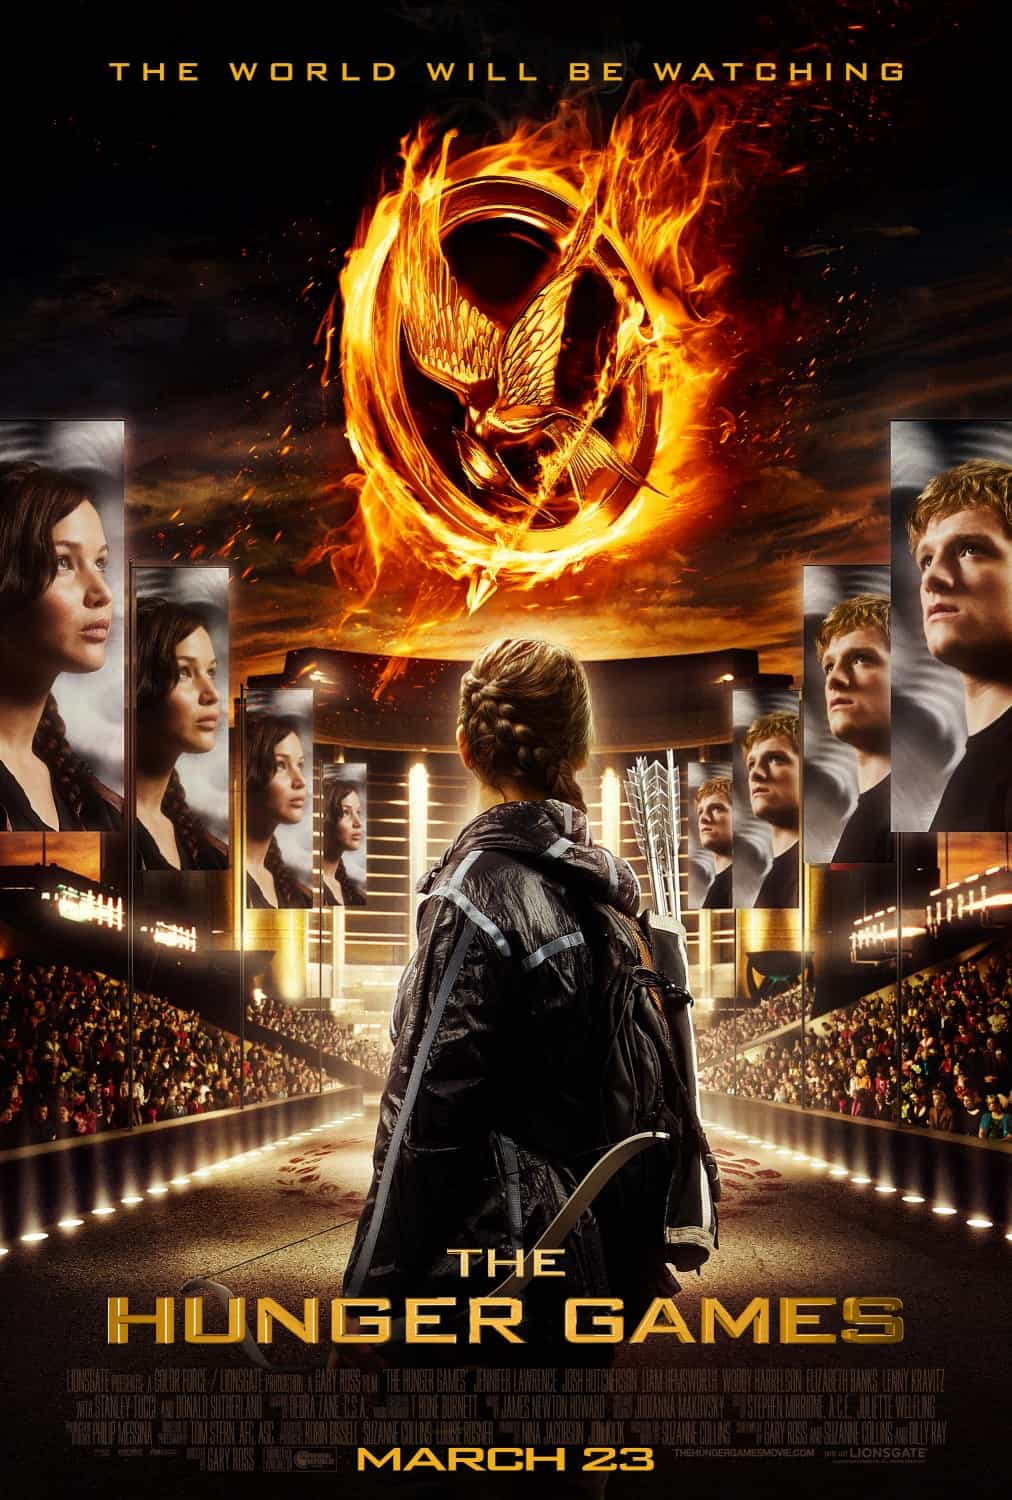 The Hunger Games is the most searched for film on Google in 2012